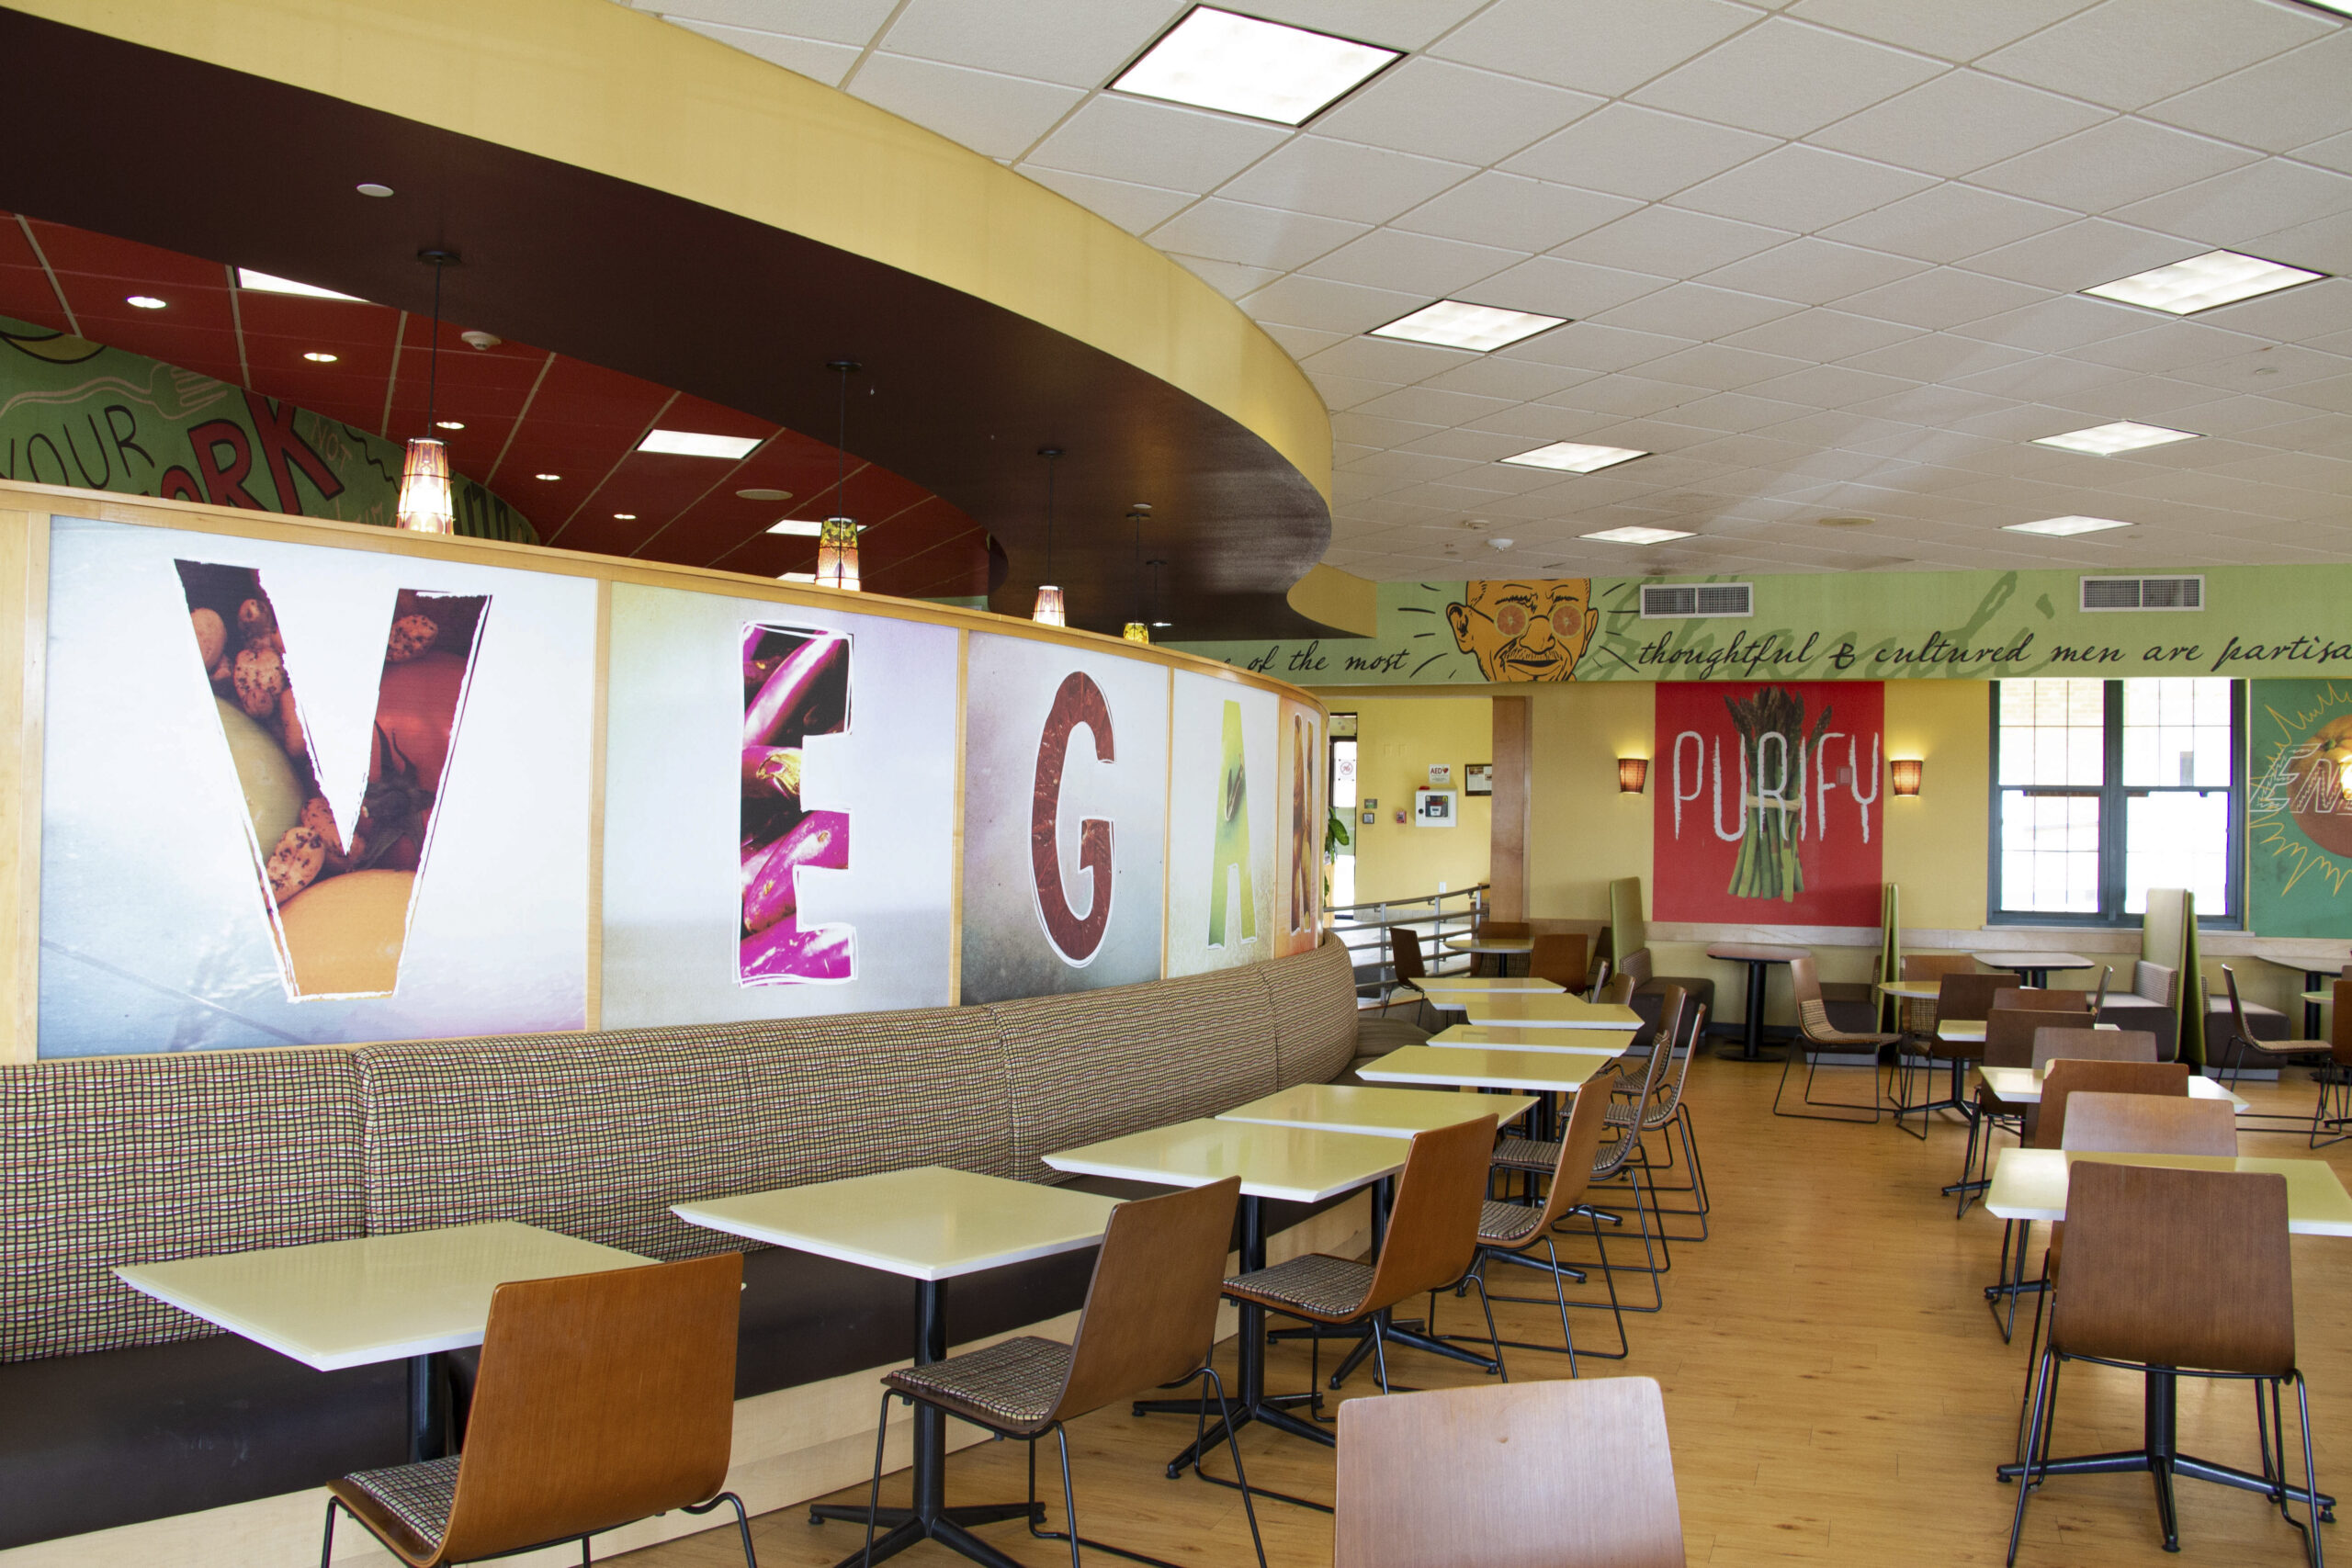 8 ways to take campus dining to the next level - University Business